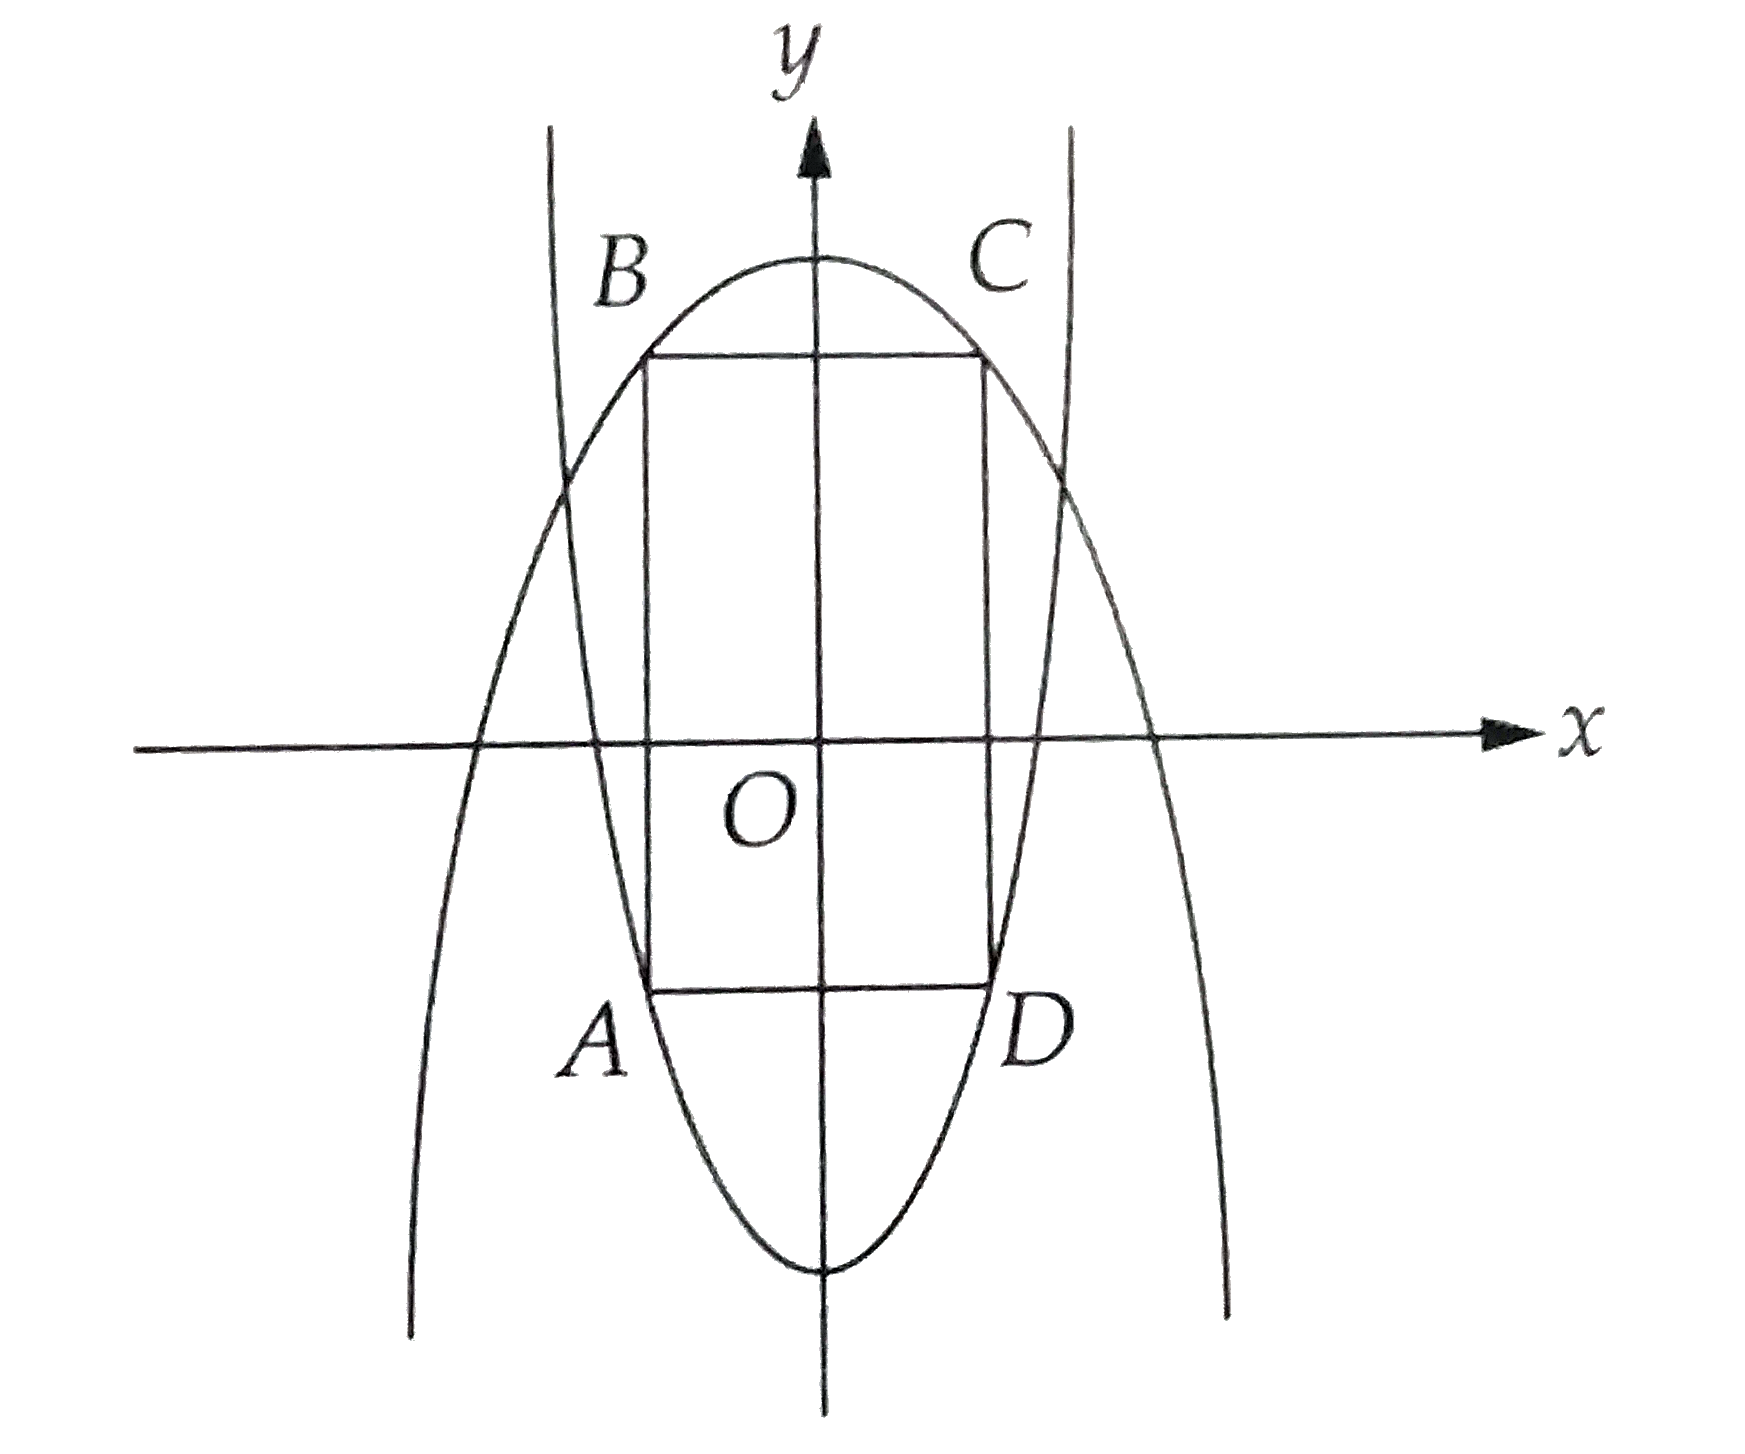 Figure shows rectangle ABCD. Points A and D are on the parabola y = 2x^(2)-8, and points B and C are on the parabola y = 9-x^(2). If point B has coordinates (-1.50, 6.75), what is the area of rectangle ABCD ?